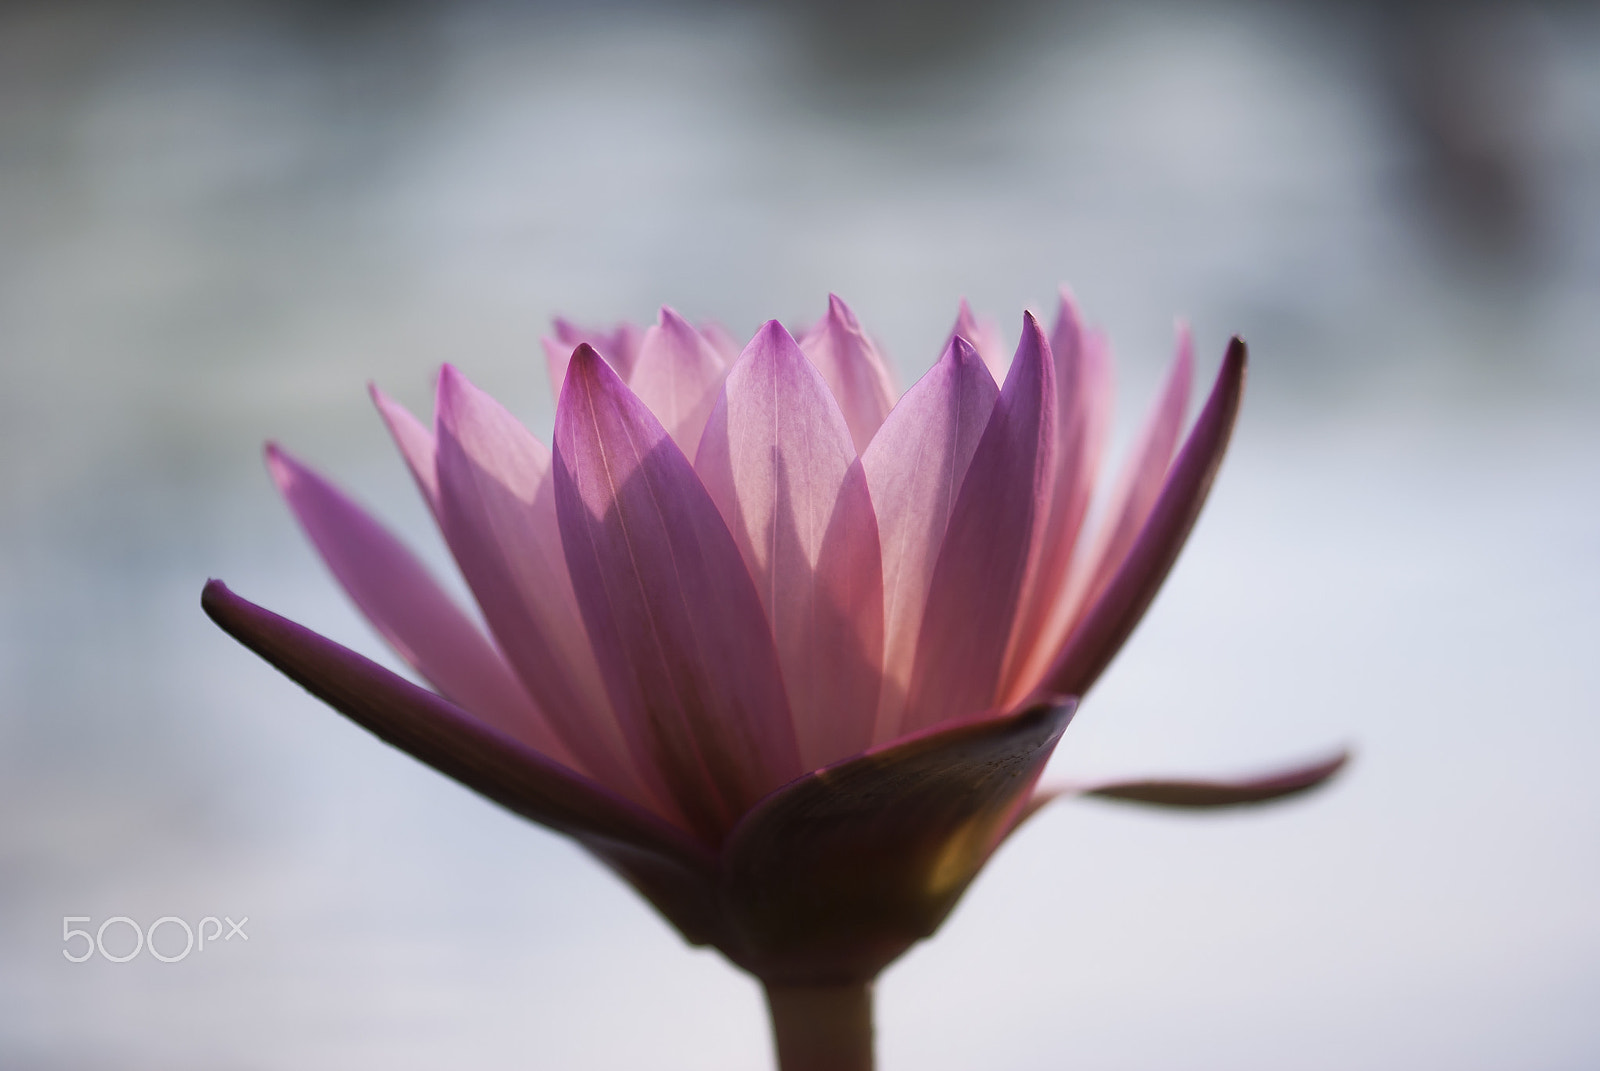 Nikon D60 + Nikon AF-S Micro-Nikkor 105mm F2.8G IF-ED VR sample photo. Pink water lily photography